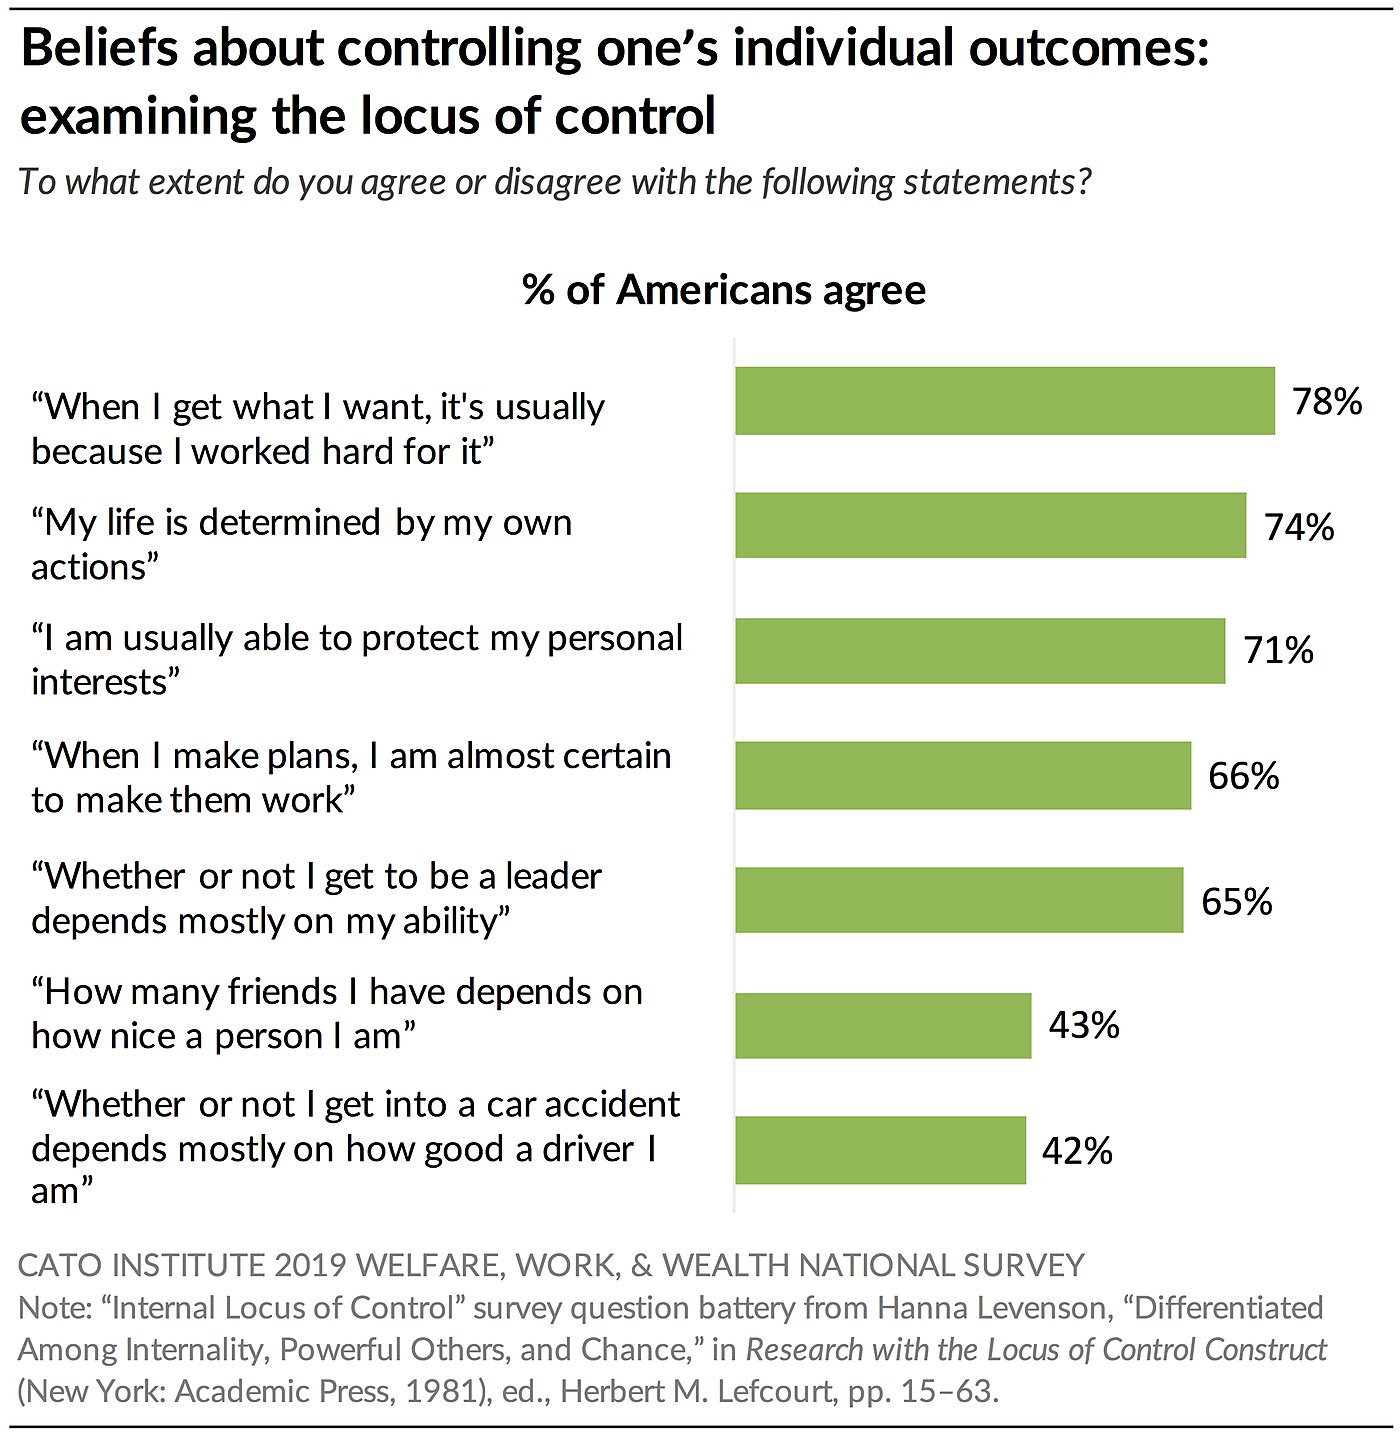 Beliefs About Controlling One's Individual Outcomes